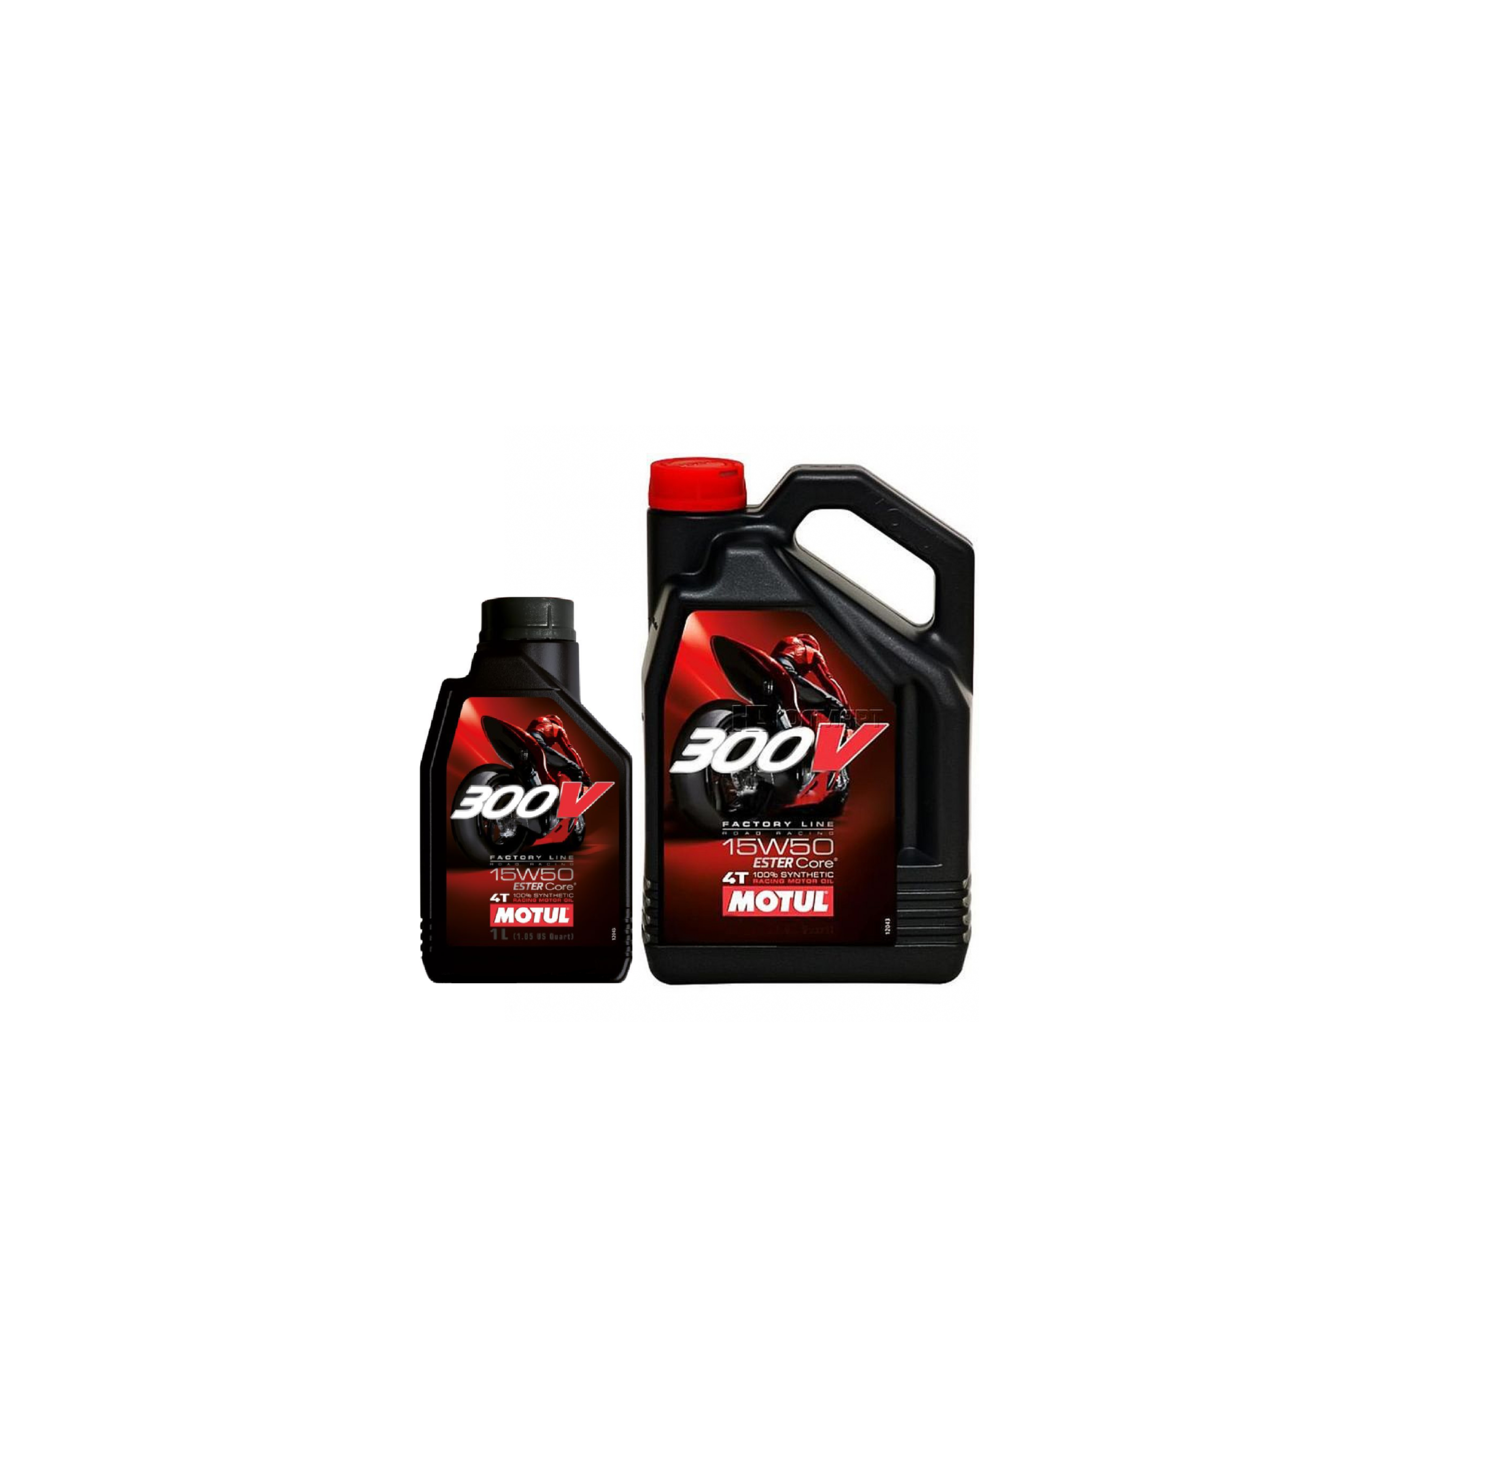 <span style="font-weight: bold;">Масло моторное MOTUL 300V 15W-50 4Т, 4 л.</span>&nbsp;